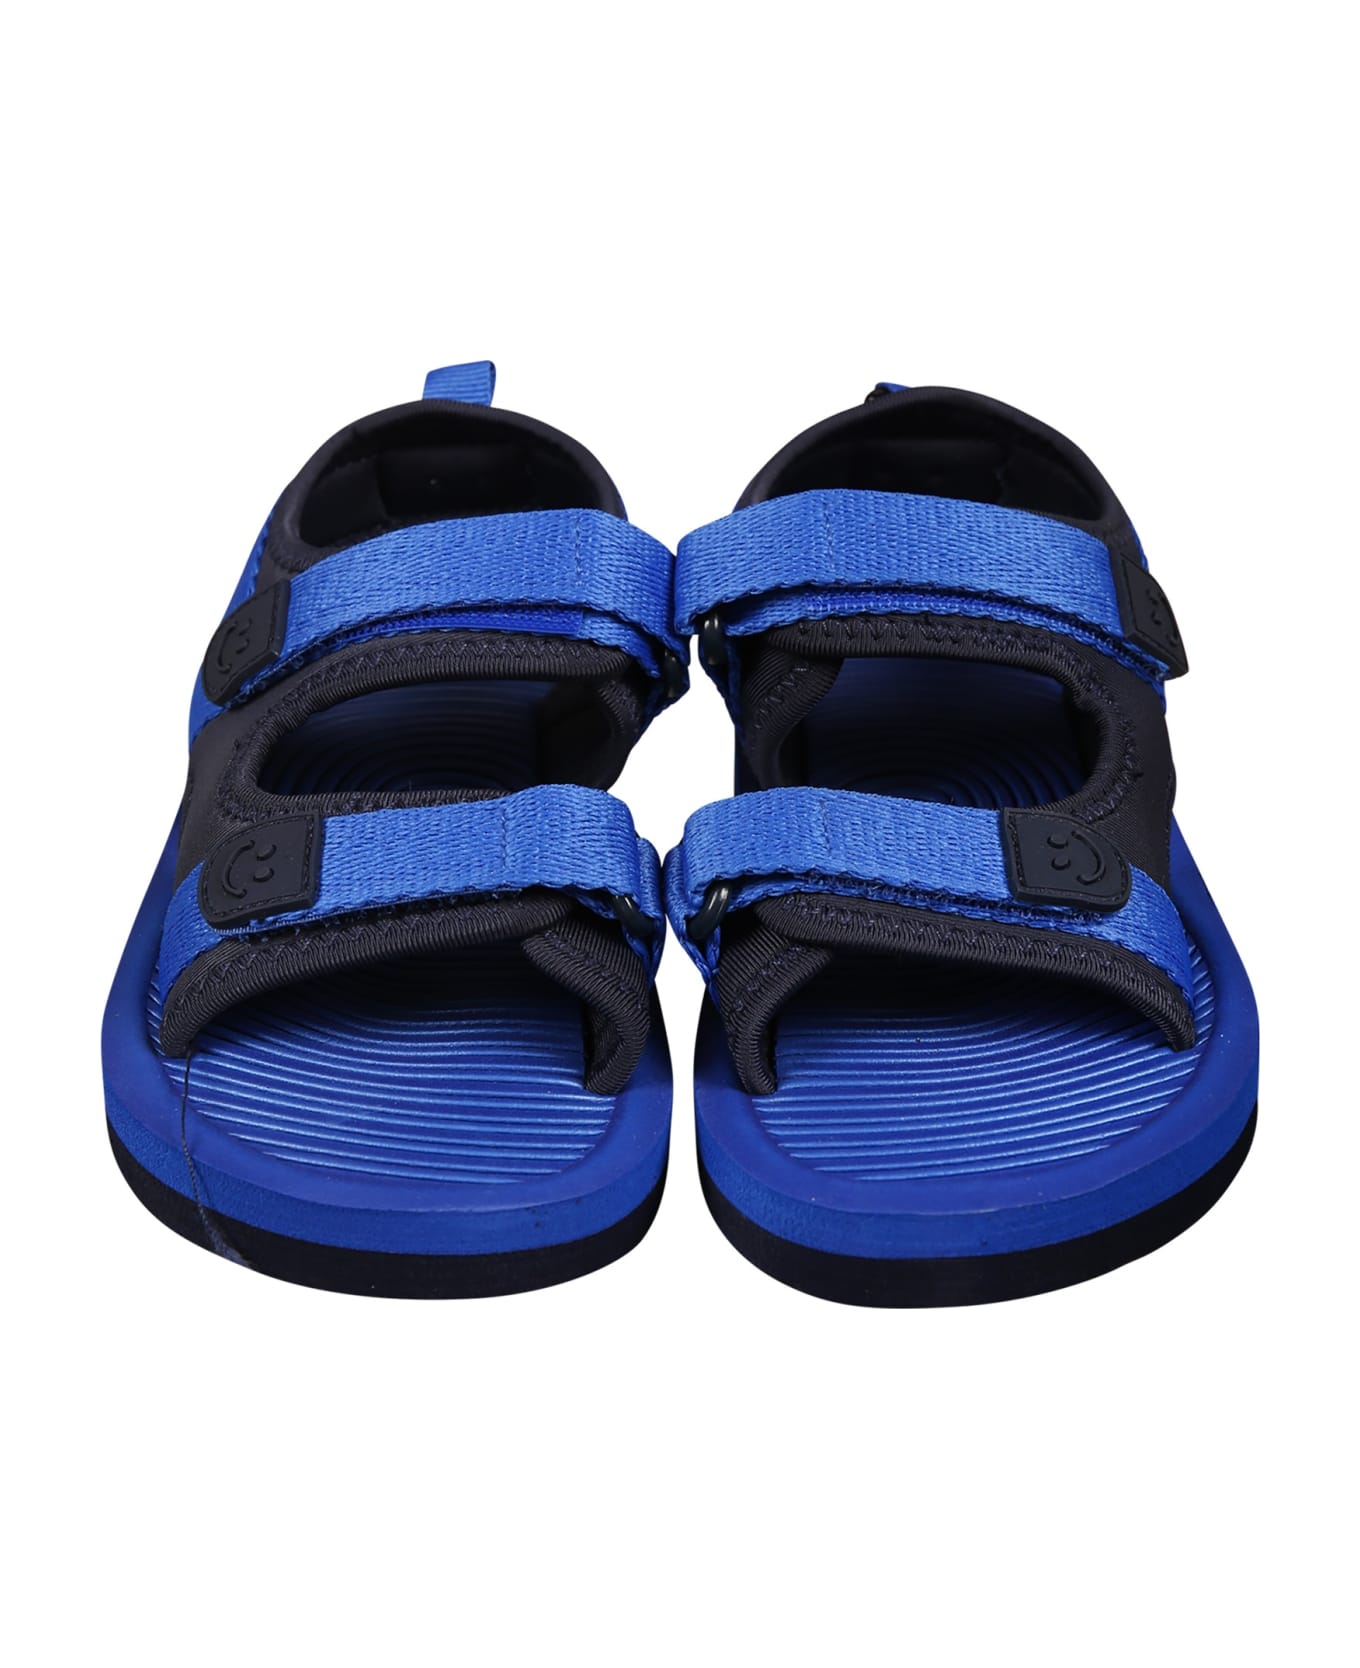 Molo Blue Sandals For Boy With Logo - Blue